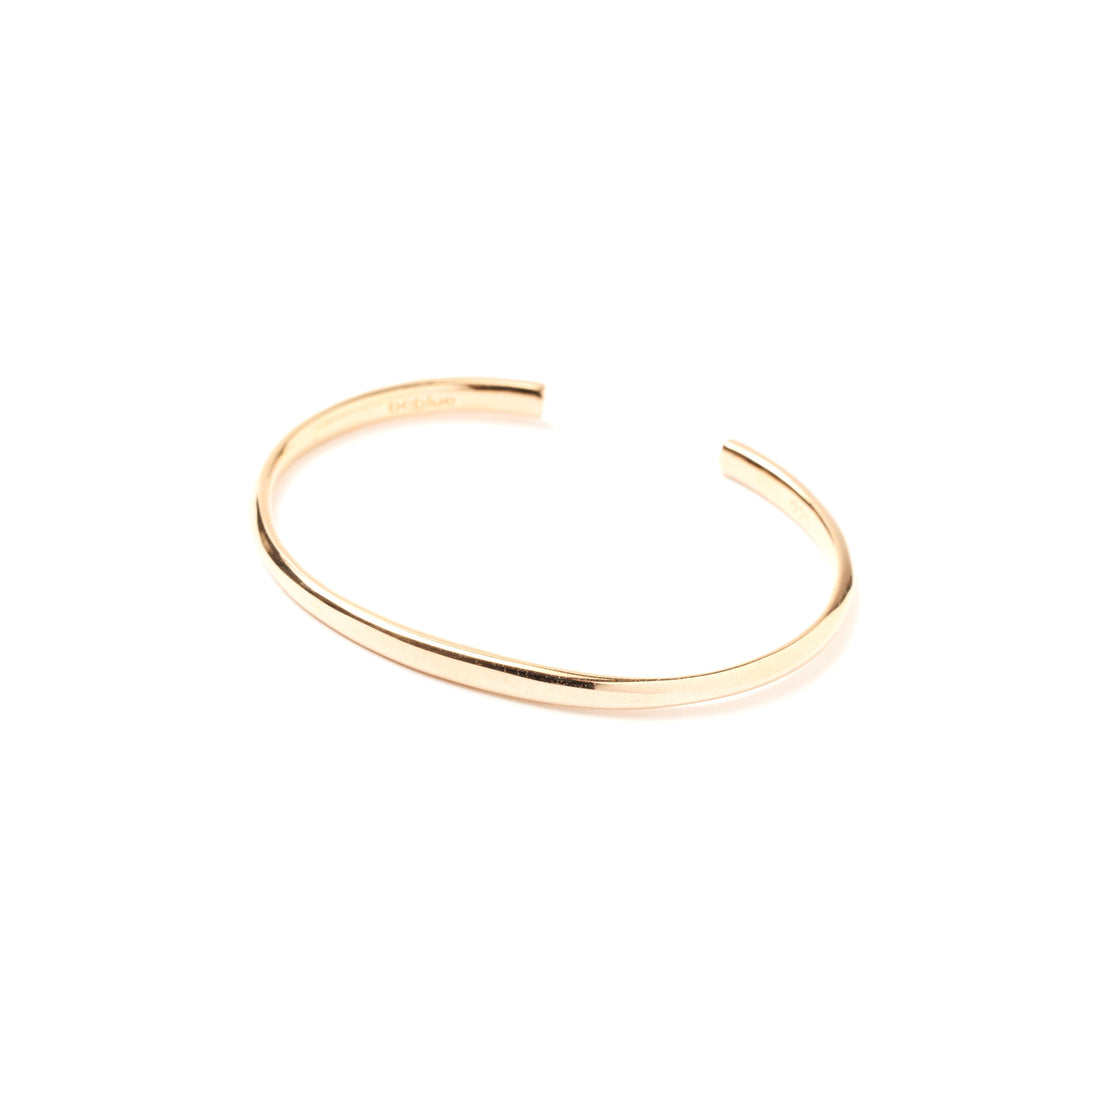 be empowered women's bracelet sterling silver 14kt gold vermeil handcrafted in canada  